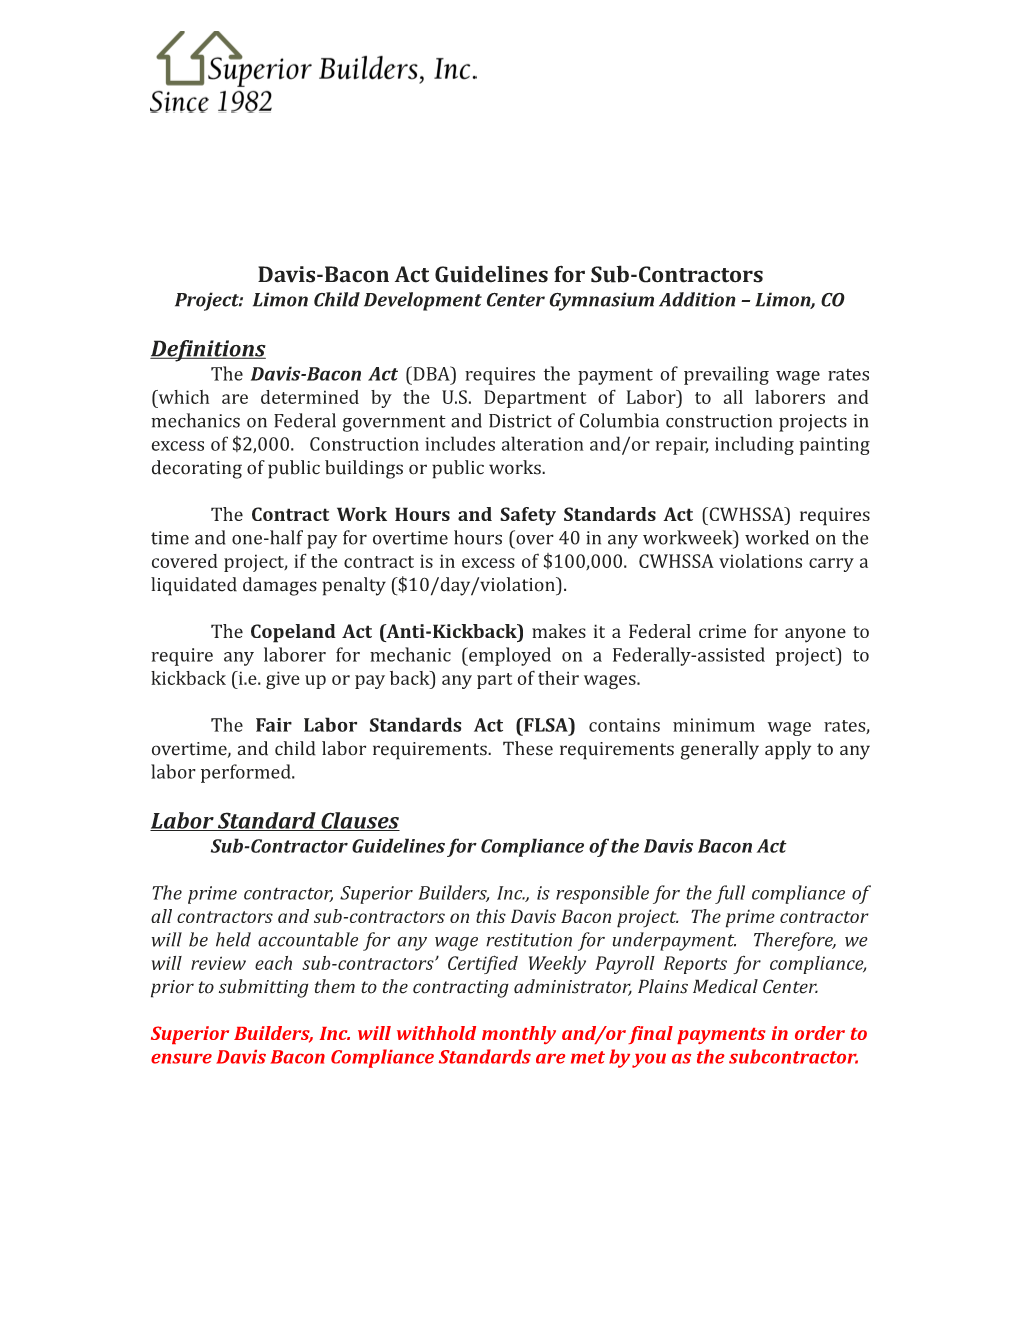 Davis-Bacon Act Guidelines for Sub-Contractors